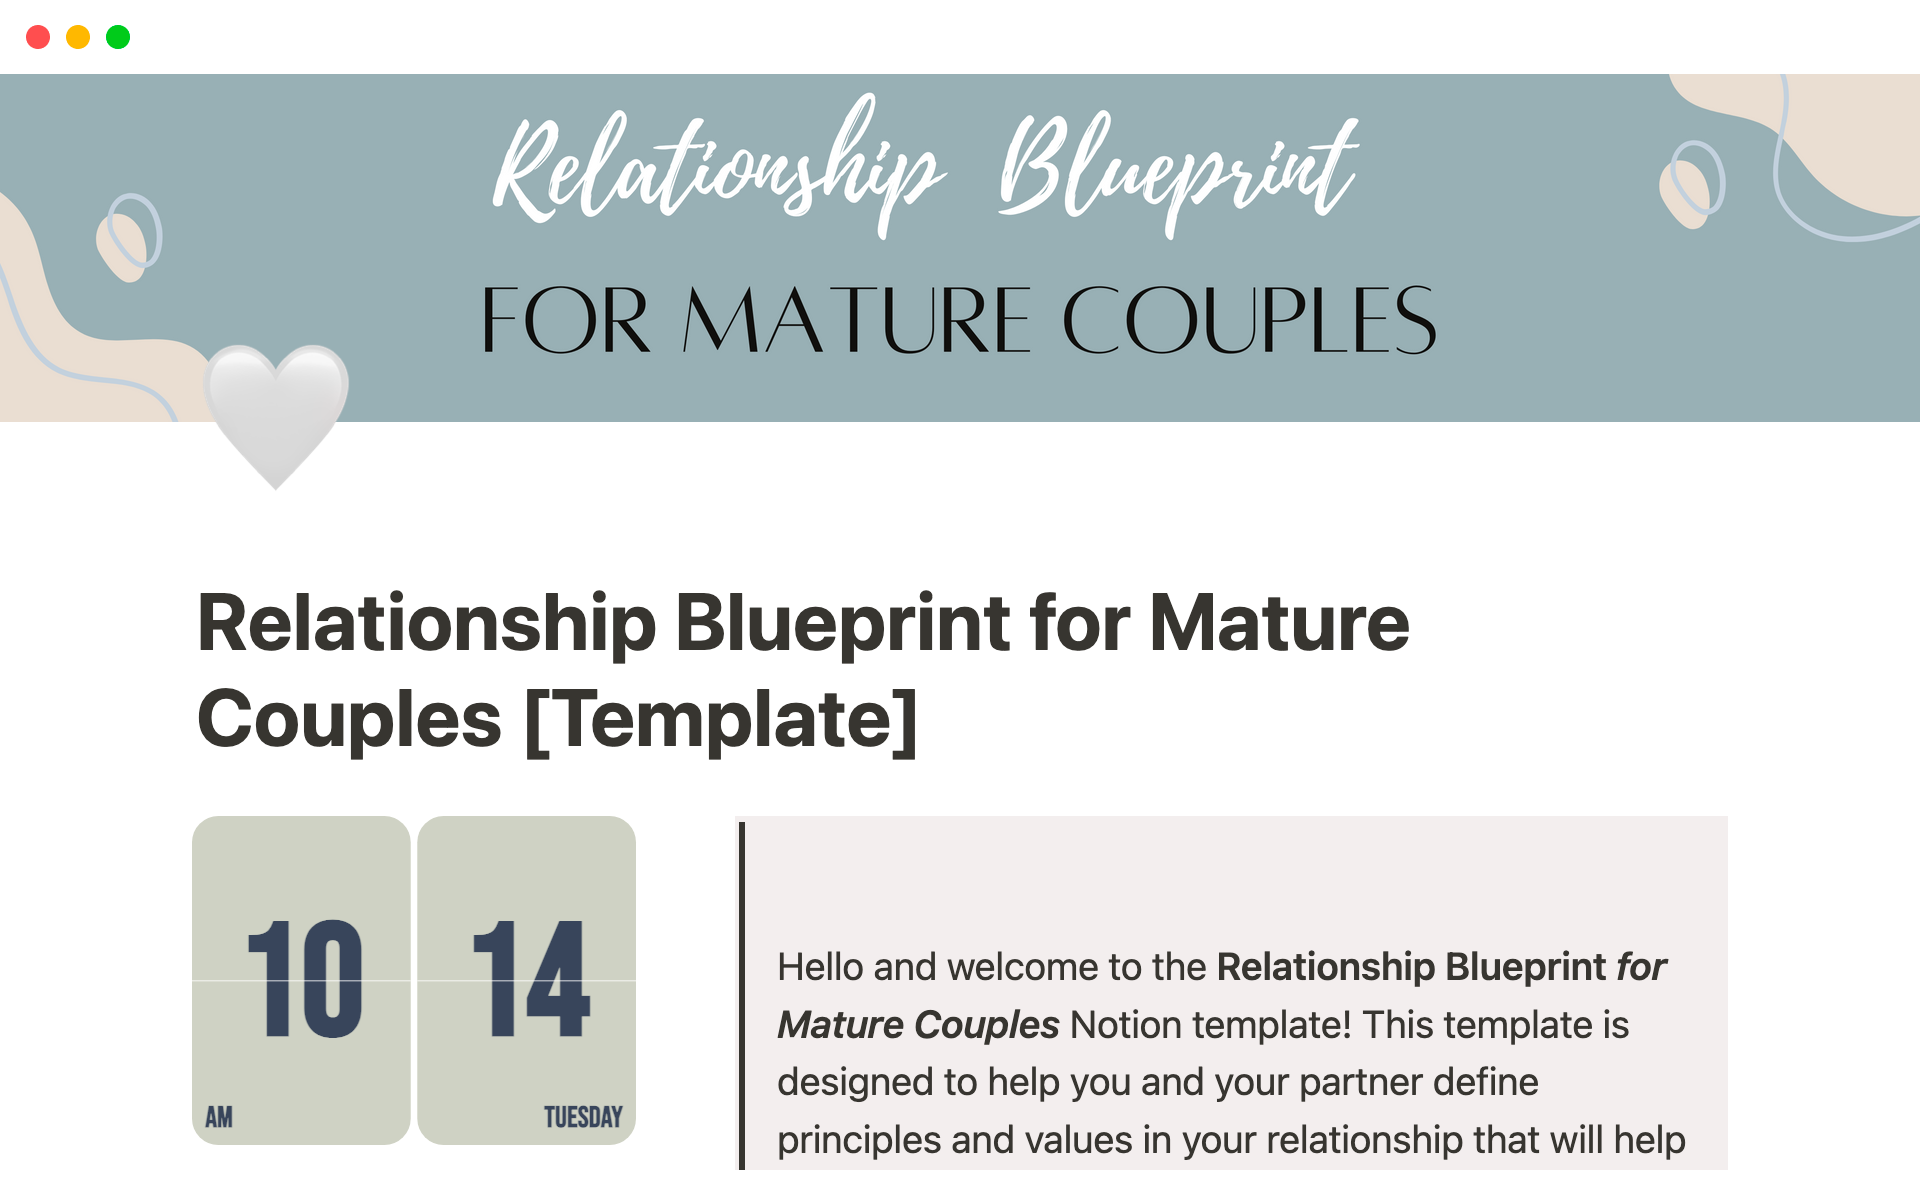 The Relationship Blueprint for Mature Couples template is a comprehensive digital tool that encourages mature couples to explore, define, and align their relationship values, enhancing their bond and paving the way for a fulfilling long-term partnership.